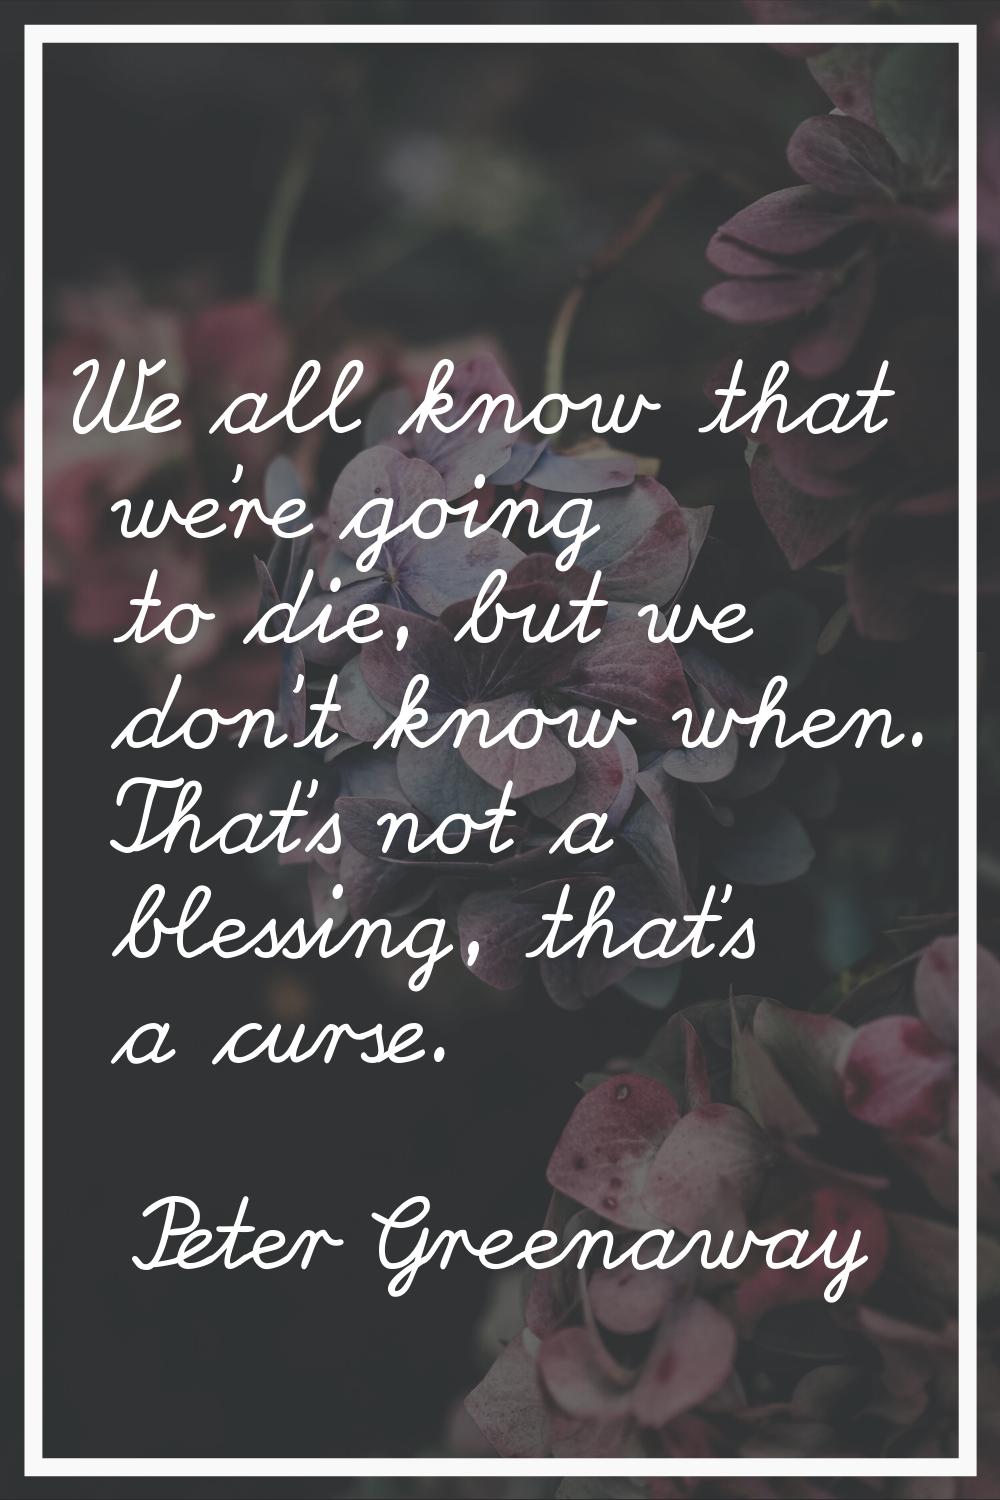 We all know that we're going to die, but we don't know when. That's not a blessing, that's a curse.